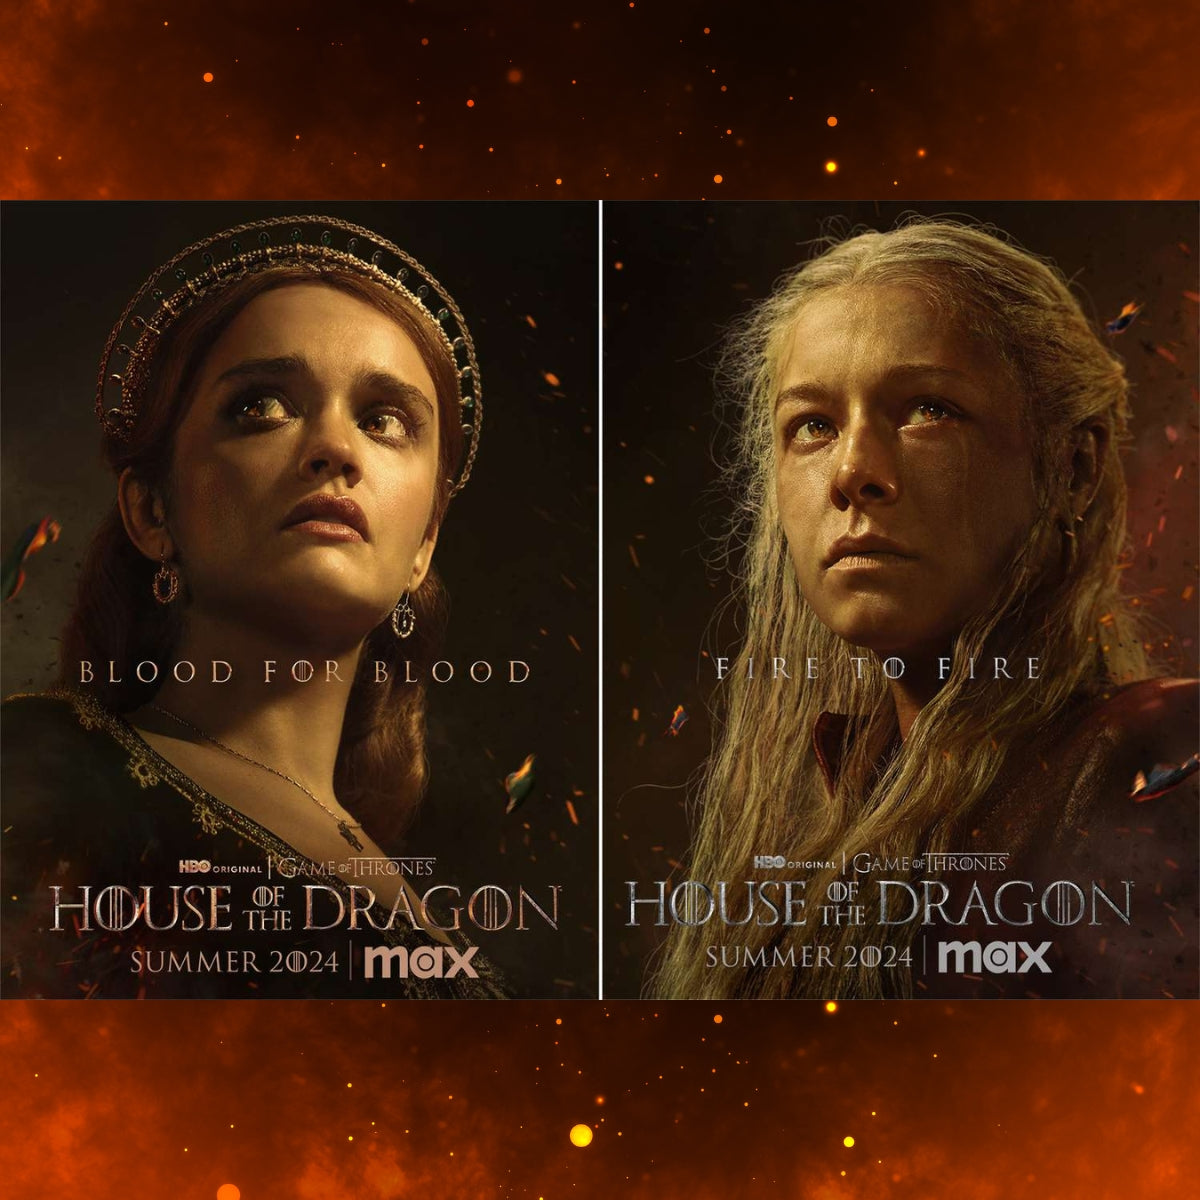 House of the Dragon: House of the Dragon Season 2: Everything we